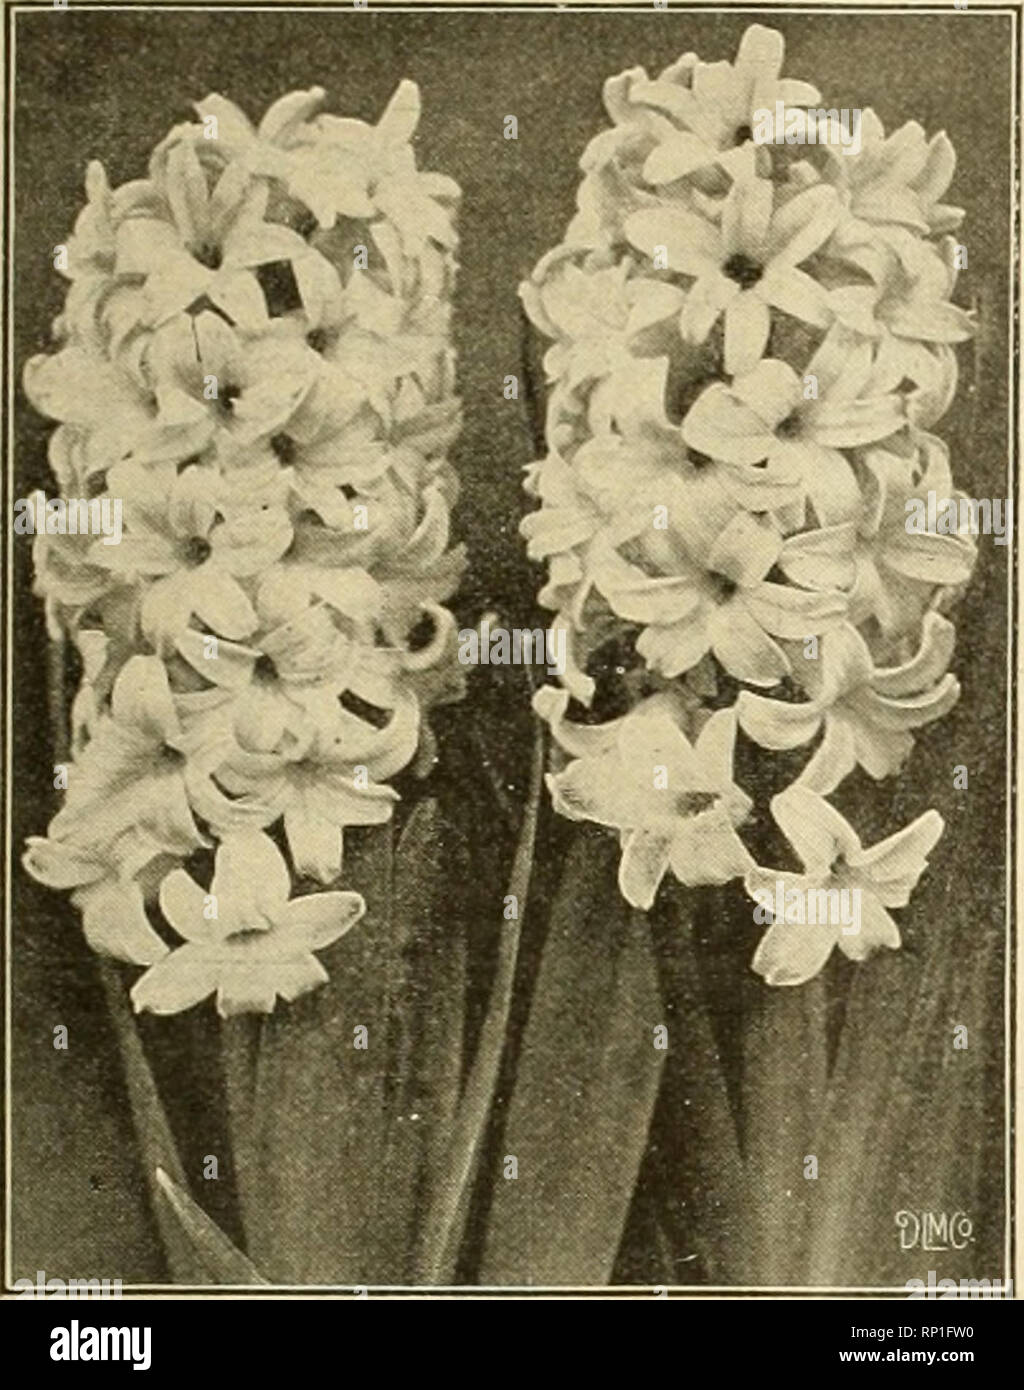 . The American florist : a weekly journal for the trade. Floriculture; Florists. igi4. The American Florist. 539 All Dutch and French Bulhs. Hyacinths, Tulips, Narcissus, (Trumpet Major and others) Formosum, Callas, Harrisii, Freesias, Paeonies FRENCH ROMAN HYACINTHS 11-12 ctms, 2500 to case, per 1000, - $25.00 Calla Bulbs 1^ to V-n inch. IVi to 2 -inch. 2 to 2k2-inch. Per 100 $ 5.50 8.50 12.00 L. Formosum Bulbs Per 1000 6- 8-inch, 350 to case.$40.00 7- 9-inch,250 to case. 60.00 8- 9-inch, 225 to case. 70.00 8-10-inch, 200 to case. 80.00 Write for Fall &quot;Book for Florists. VAUGHAN'S SEED S Stock Photo